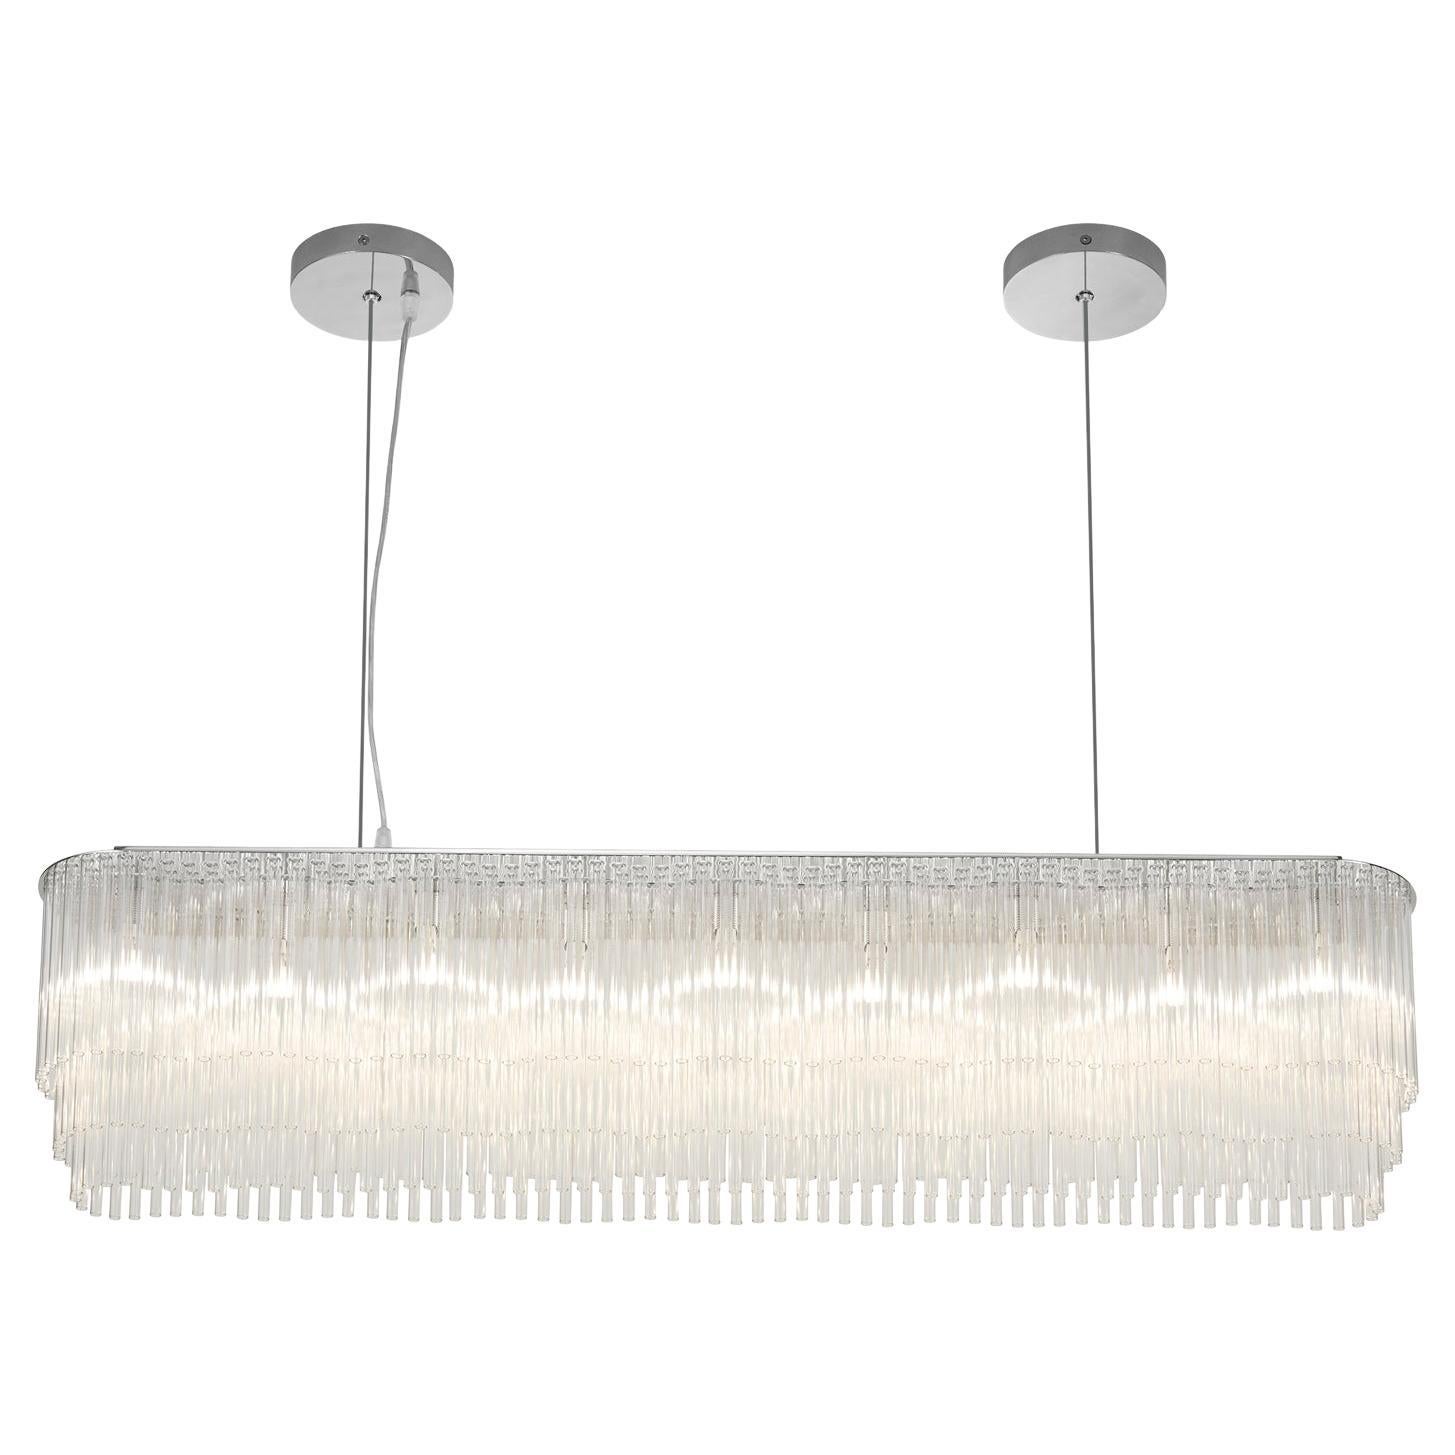 Linear Chandelier Thin 1010mm/39.75" in Brushed Nickel / Tiered Glass Profile